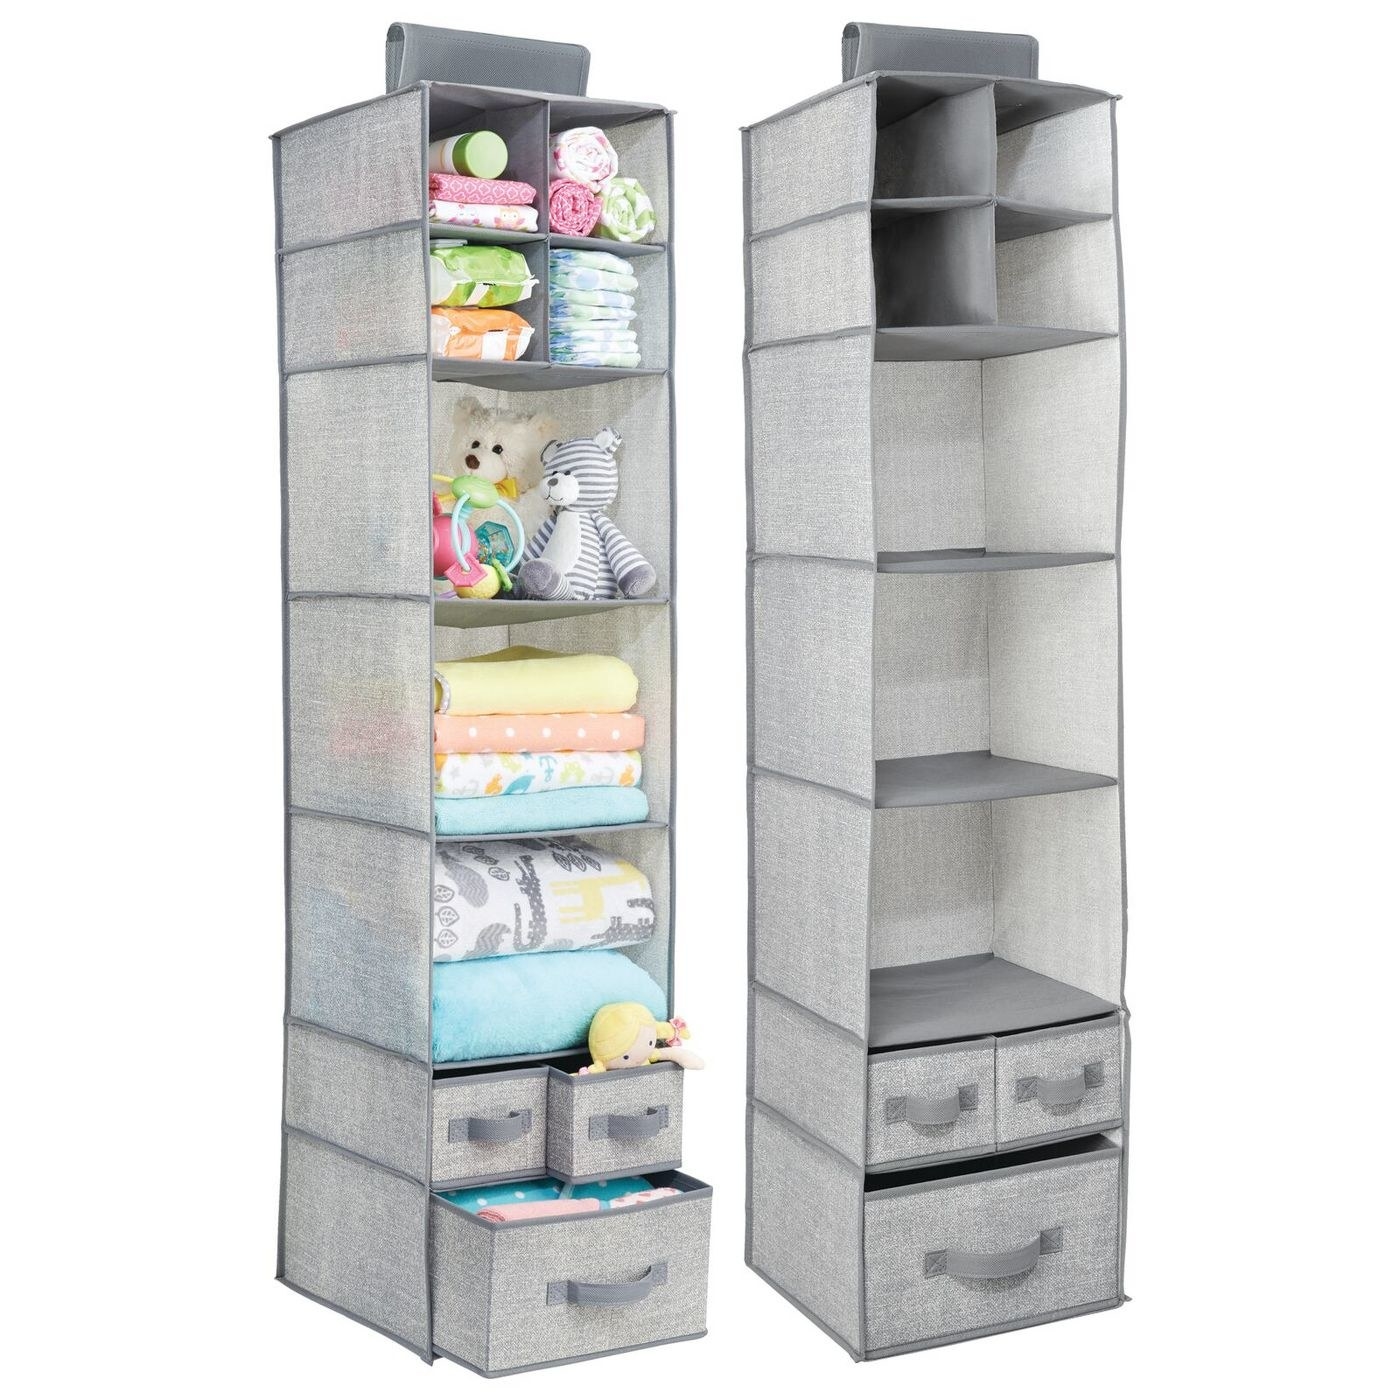 Two closet organizers with baby stuff